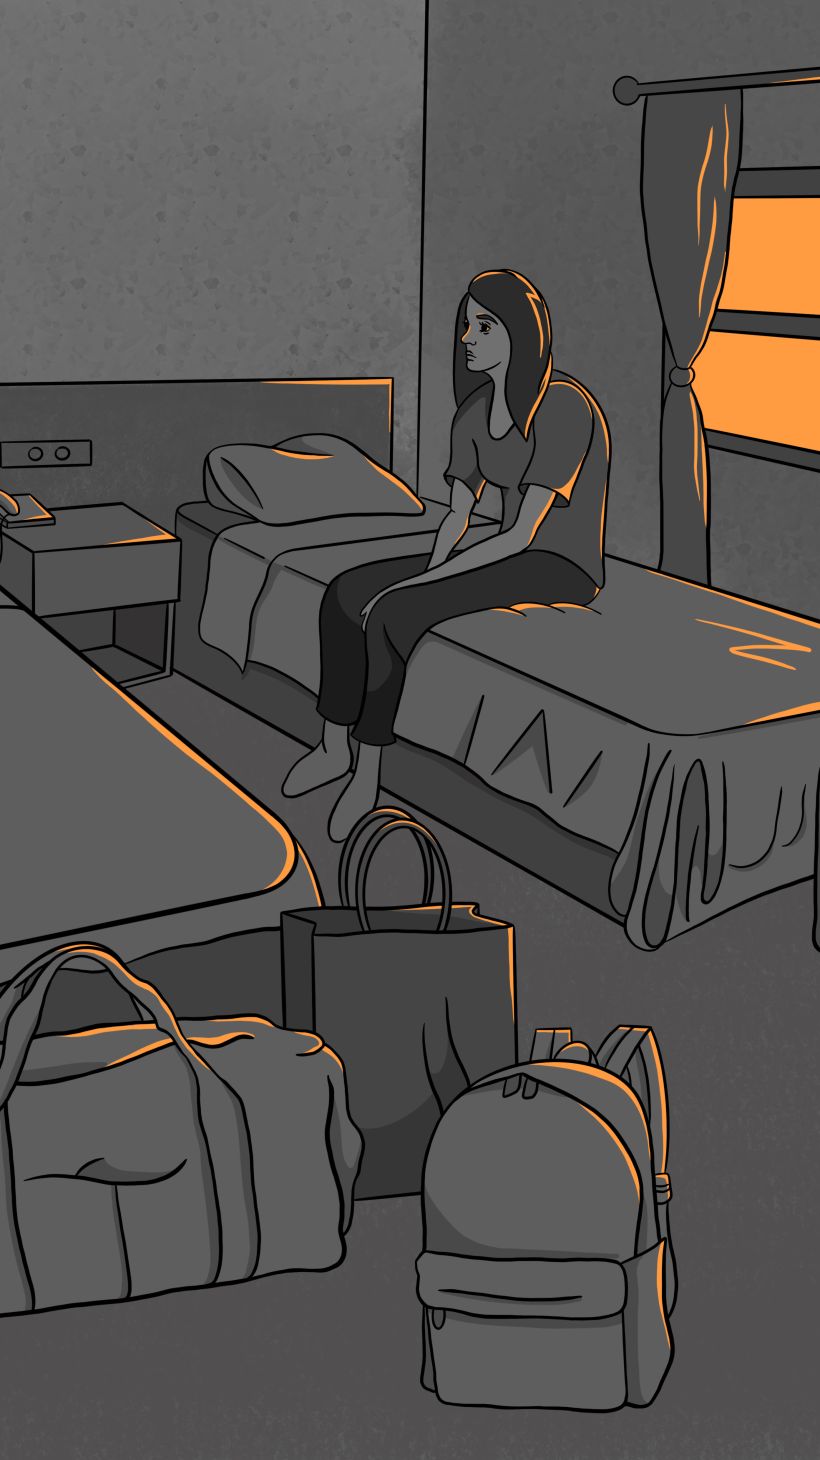 An illustration of a woman sitting on a bed with bags and suitcases in front of the bed,